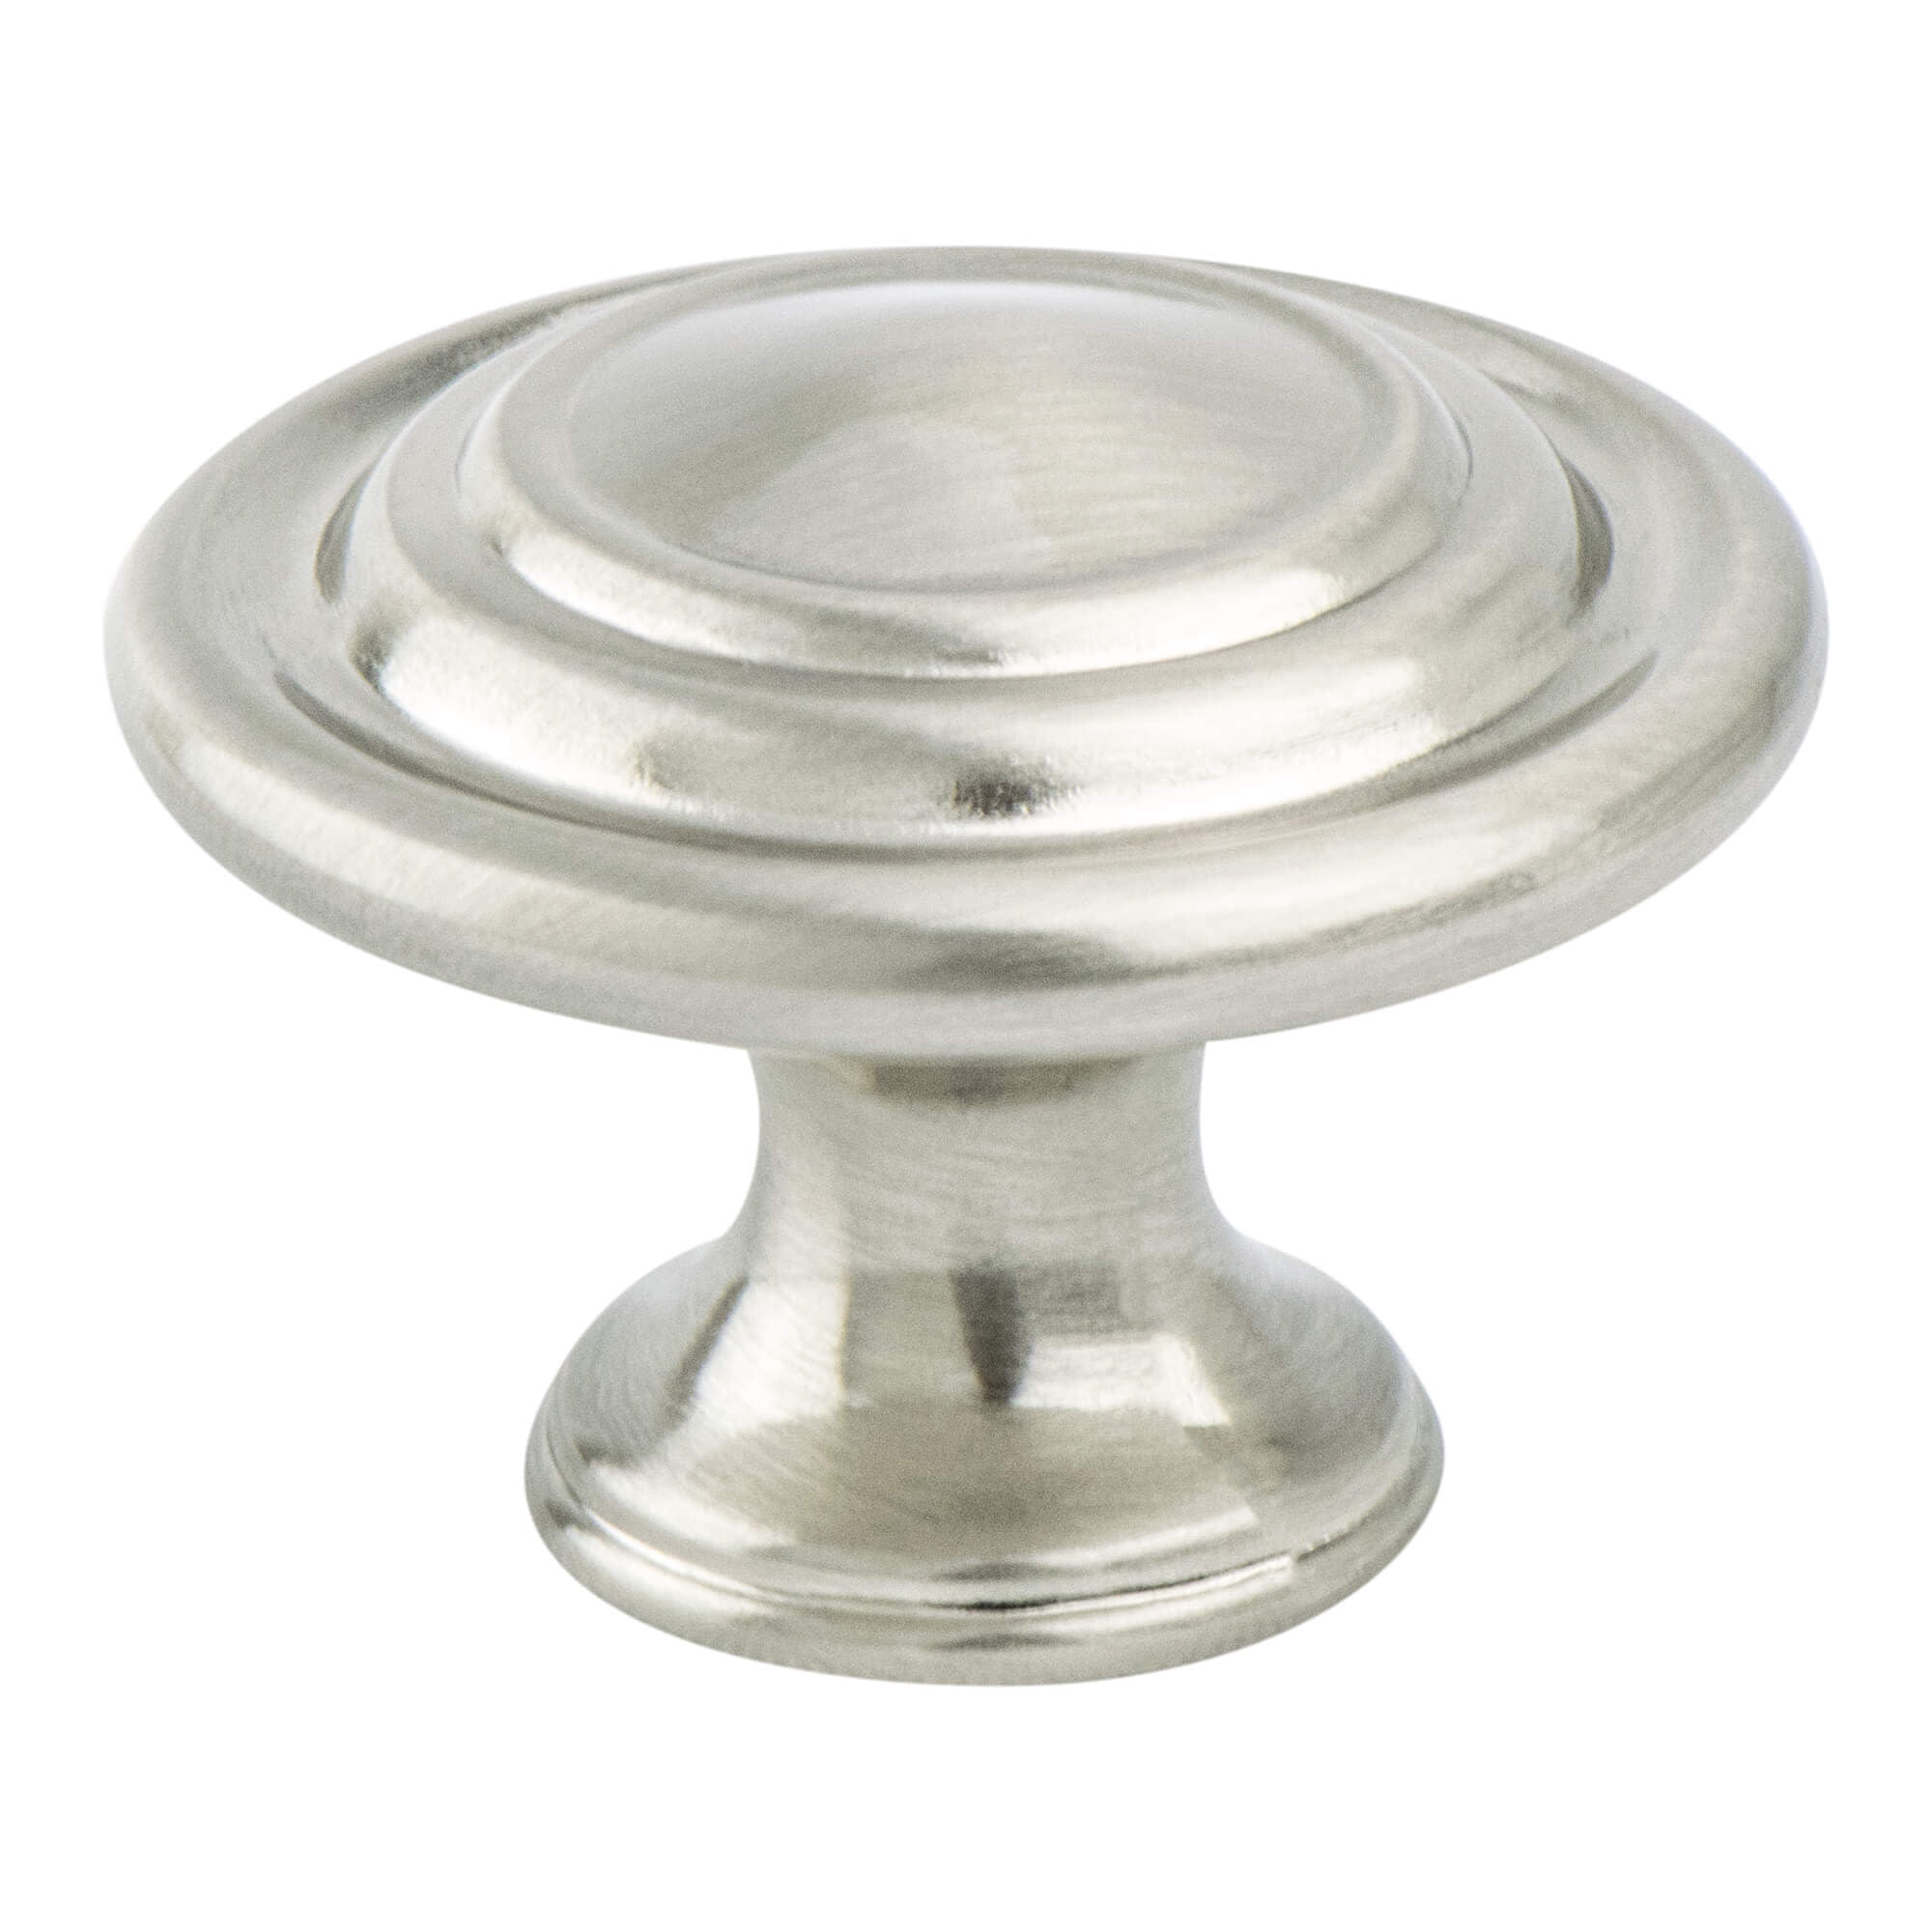 0931-1bpn-p 1.312 In. Dia. Advantage Plus 4 Knob With Brushed Nickel